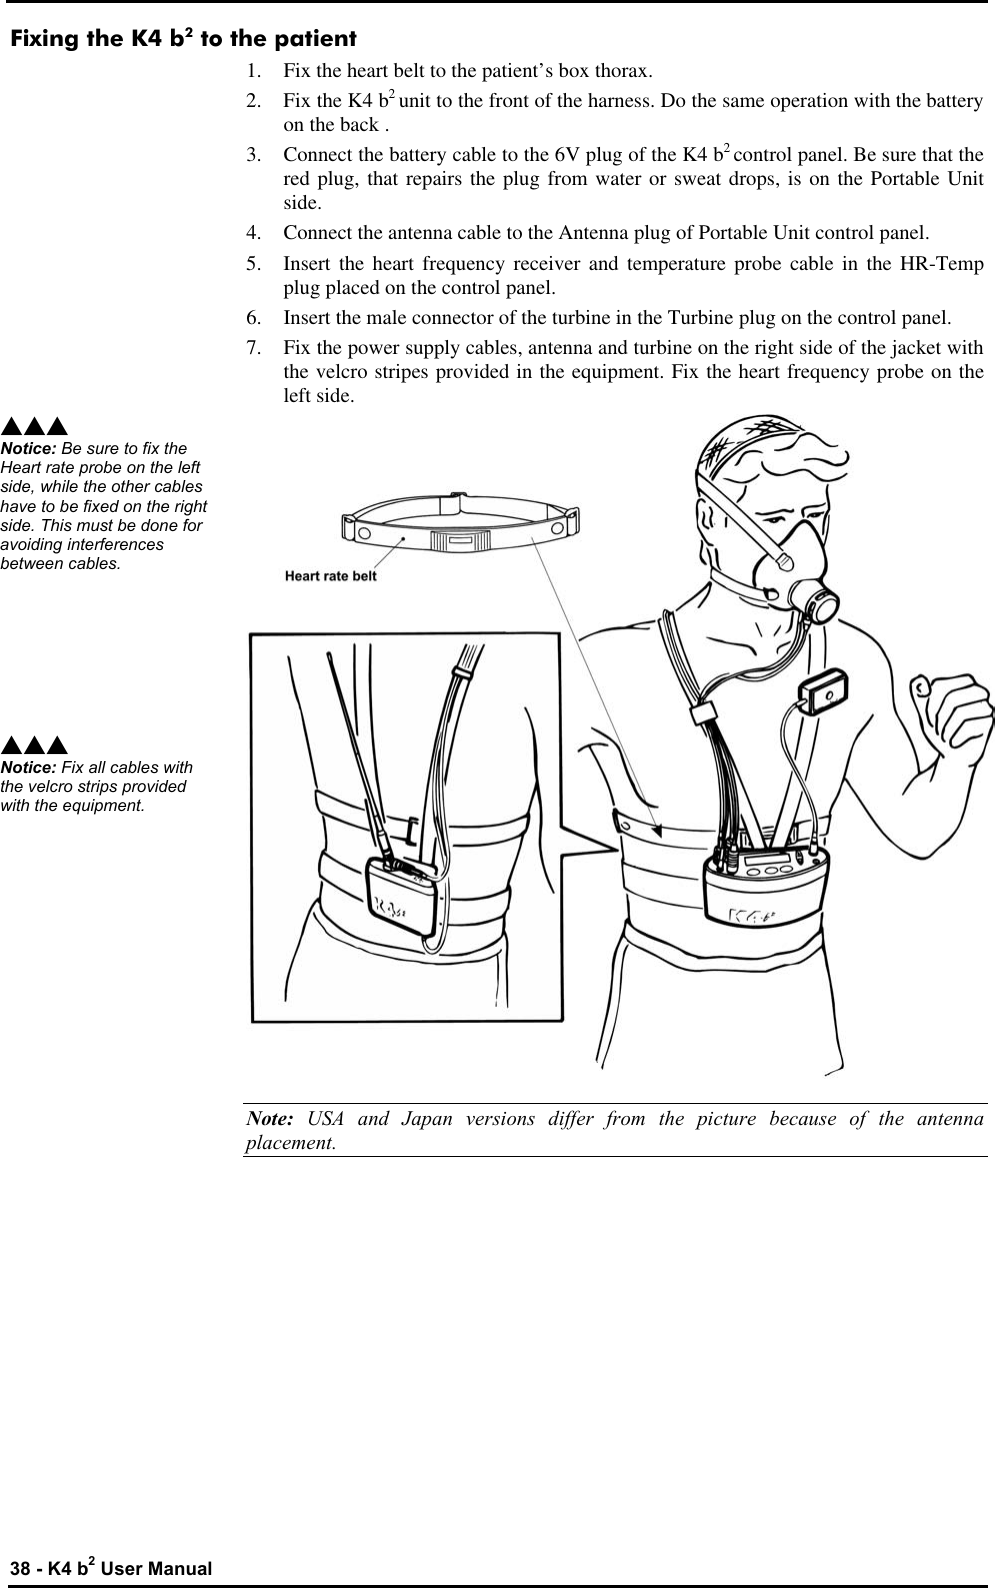  38 - K4 b2 User Manual Fixing the K4 b2 to the patient 1. Fix the heart belt to the patient’s box thorax. 2. Fix the K4 b2 unit to the front of the harness. Do the same operation with the battery on the back . 3. Connect the battery cable to the 6V plug of the K4 b2 control panel. Be sure that the red plug, that repairs the plug from water or sweat drops, is on the Portable Unit side. 4. Connect the antenna cable to the Antenna plug of Portable Unit control panel. 5. Insert the heart frequency receiver and temperature probe cable in the HR-Temp plug placed on the control panel. 6. Insert the male connector of the turbine in the Turbine plug on the control panel. 7. Fix the power supply cables, antenna and turbine on the right side of the jacket with the velcro stripes provided in the equipment. Fix the heart frequency probe on the left side.  Note:  USA and Japan versions differ from the picture because of the antenna placement. sss Notice: Be sure to fix the Heart rate probe on the left side, while the other cables have to be fixed on the right side. This must be done for avoiding interferences between cables. sss Notice: Fix all cables with the velcro strips provided with the equipment. 